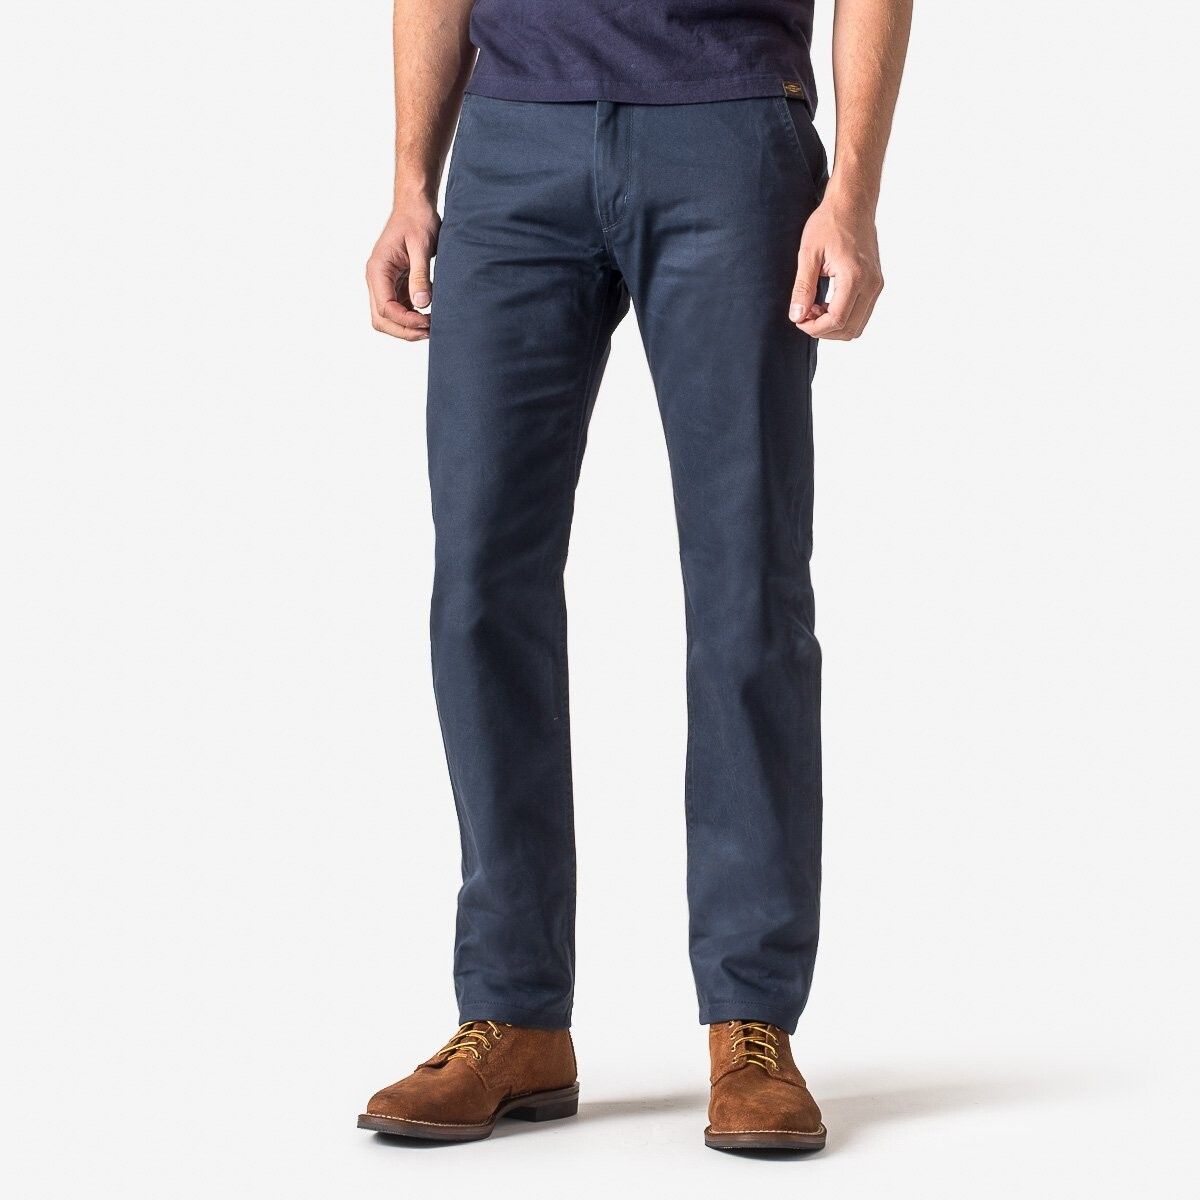 Iron Heart 9oz Mercerised Selvedge Cotton Slim Tapered Chinos Size US 29 - 1 Preview